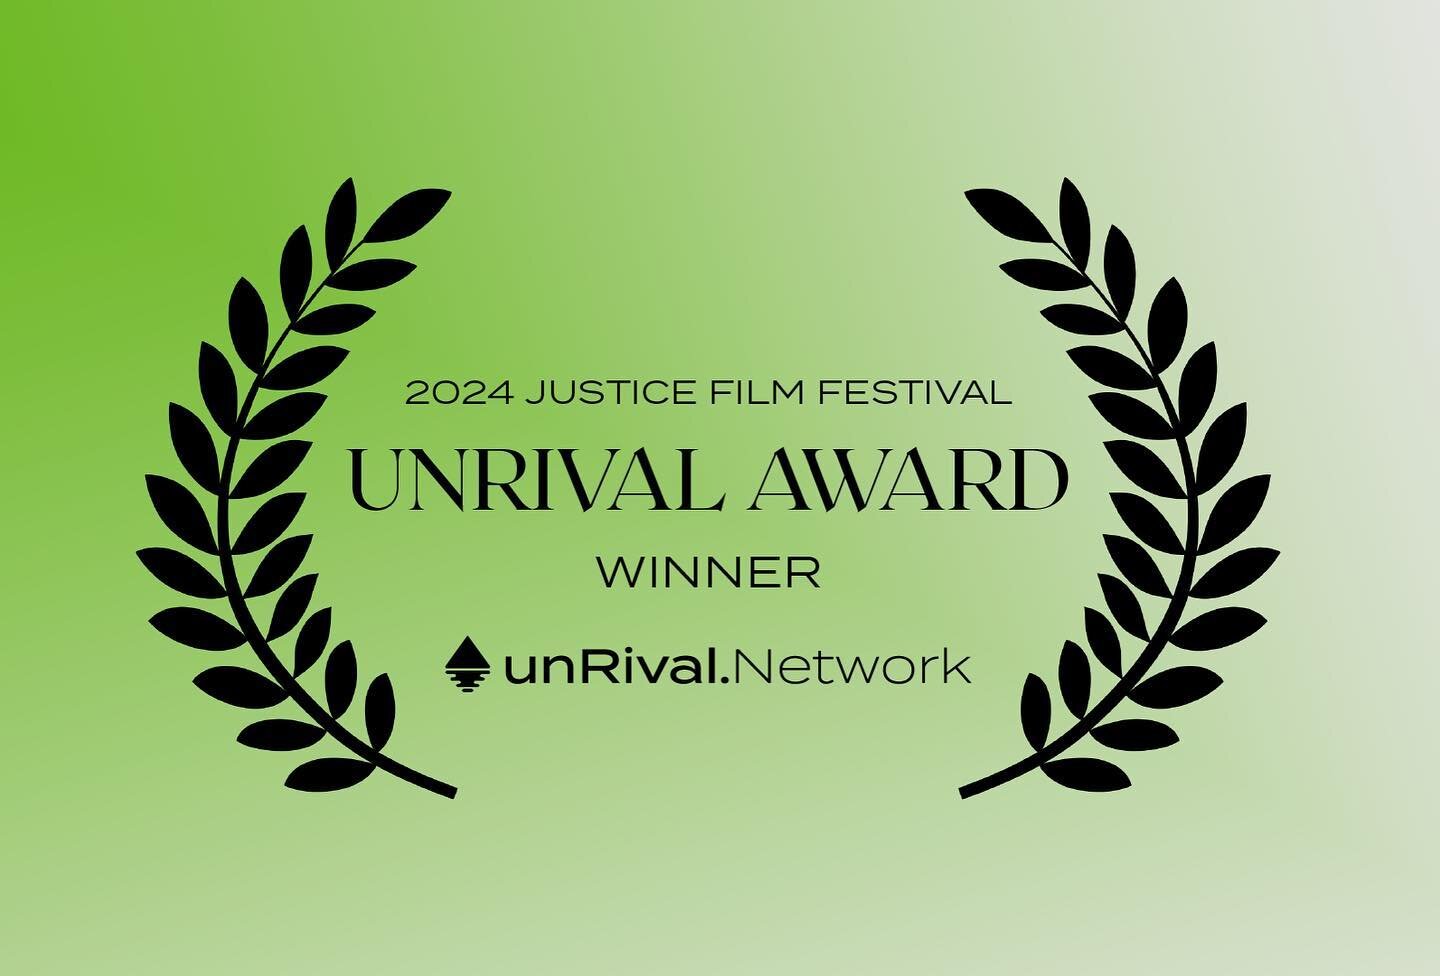 Honored to take home the unRival Award last Saturday at the @justicefilmfestival in NYC! The award is given annually to a film which powerfully shows the beauty, difficulty, and value of pursuing justice and peace for all people through nonrivalrous 